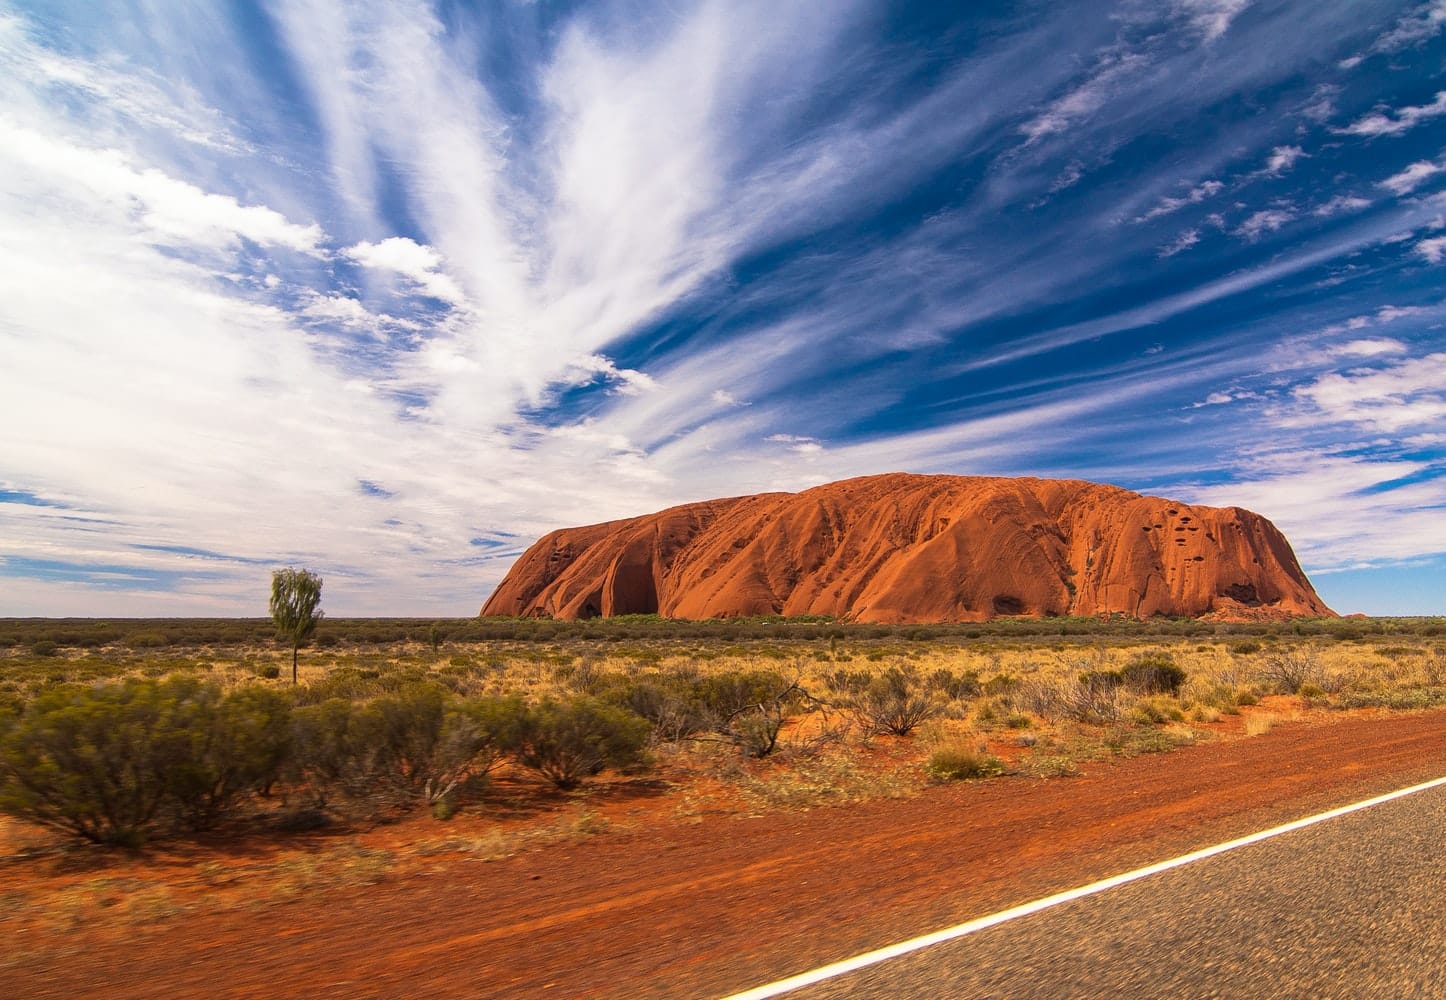 The Best Areas to Stay near Ayers Rock, Australia